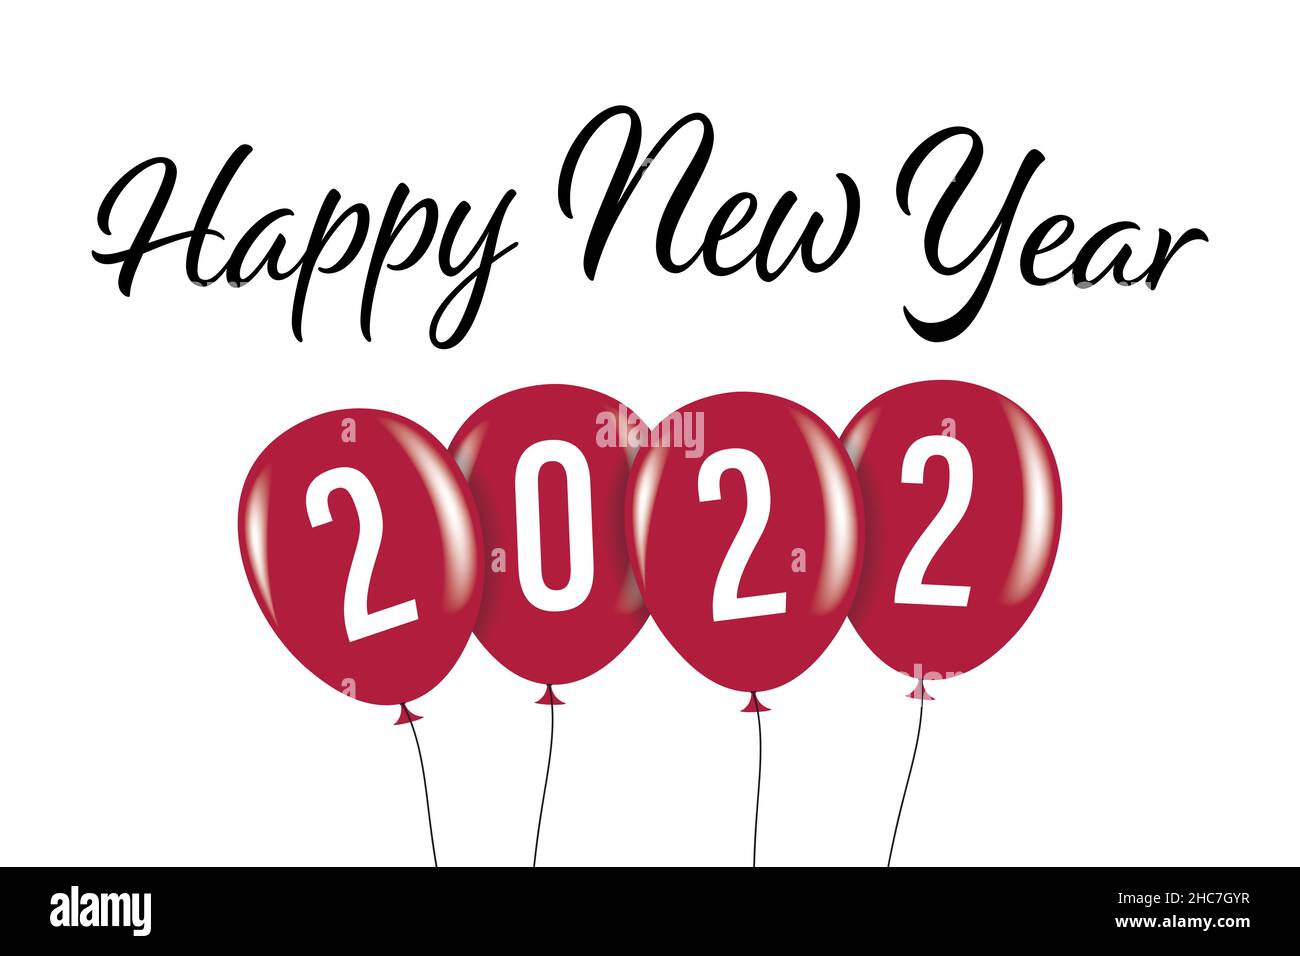 Happy New Year 2022 - Text and balloons on a white background Stock Vector